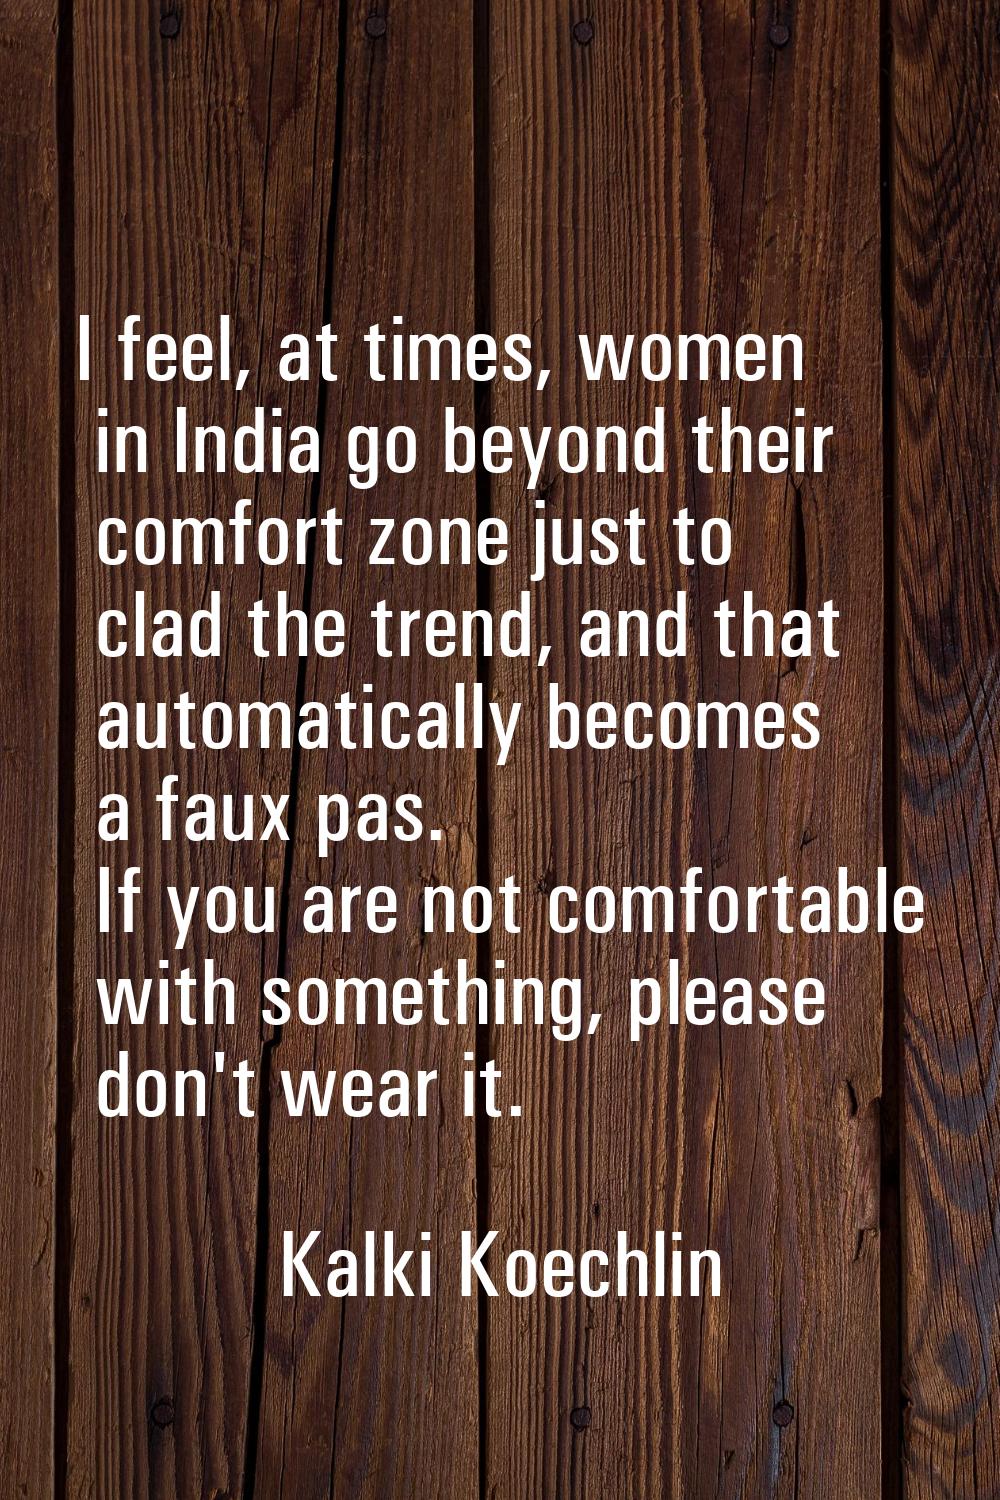 I feel, at times, women in India go beyond their comfort zone just to clad the trend, and that auto